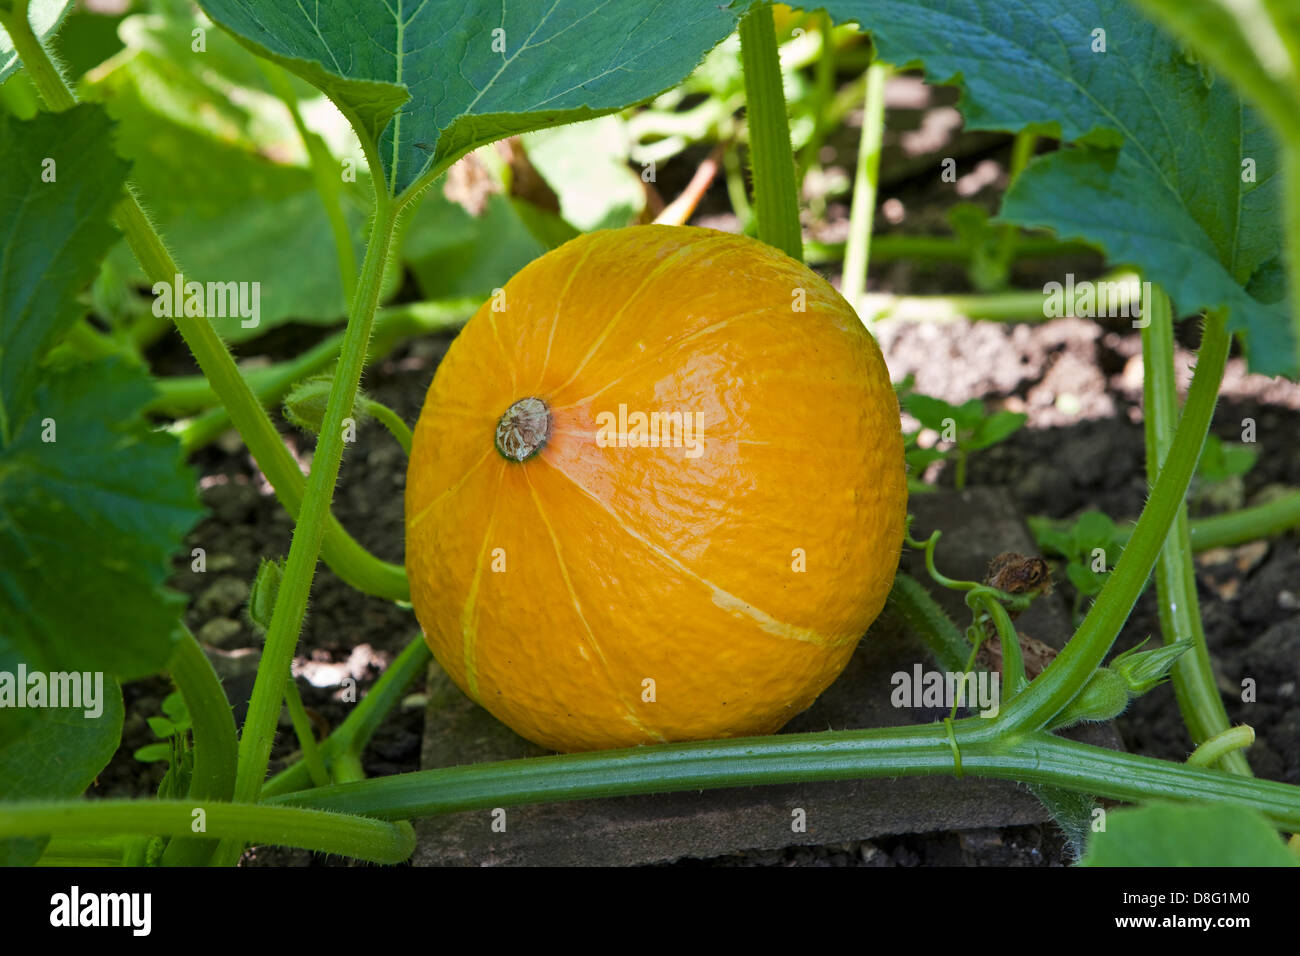 a squash, uchiki kuri, growing on a tile underneath the plant's leaves Stock Photo